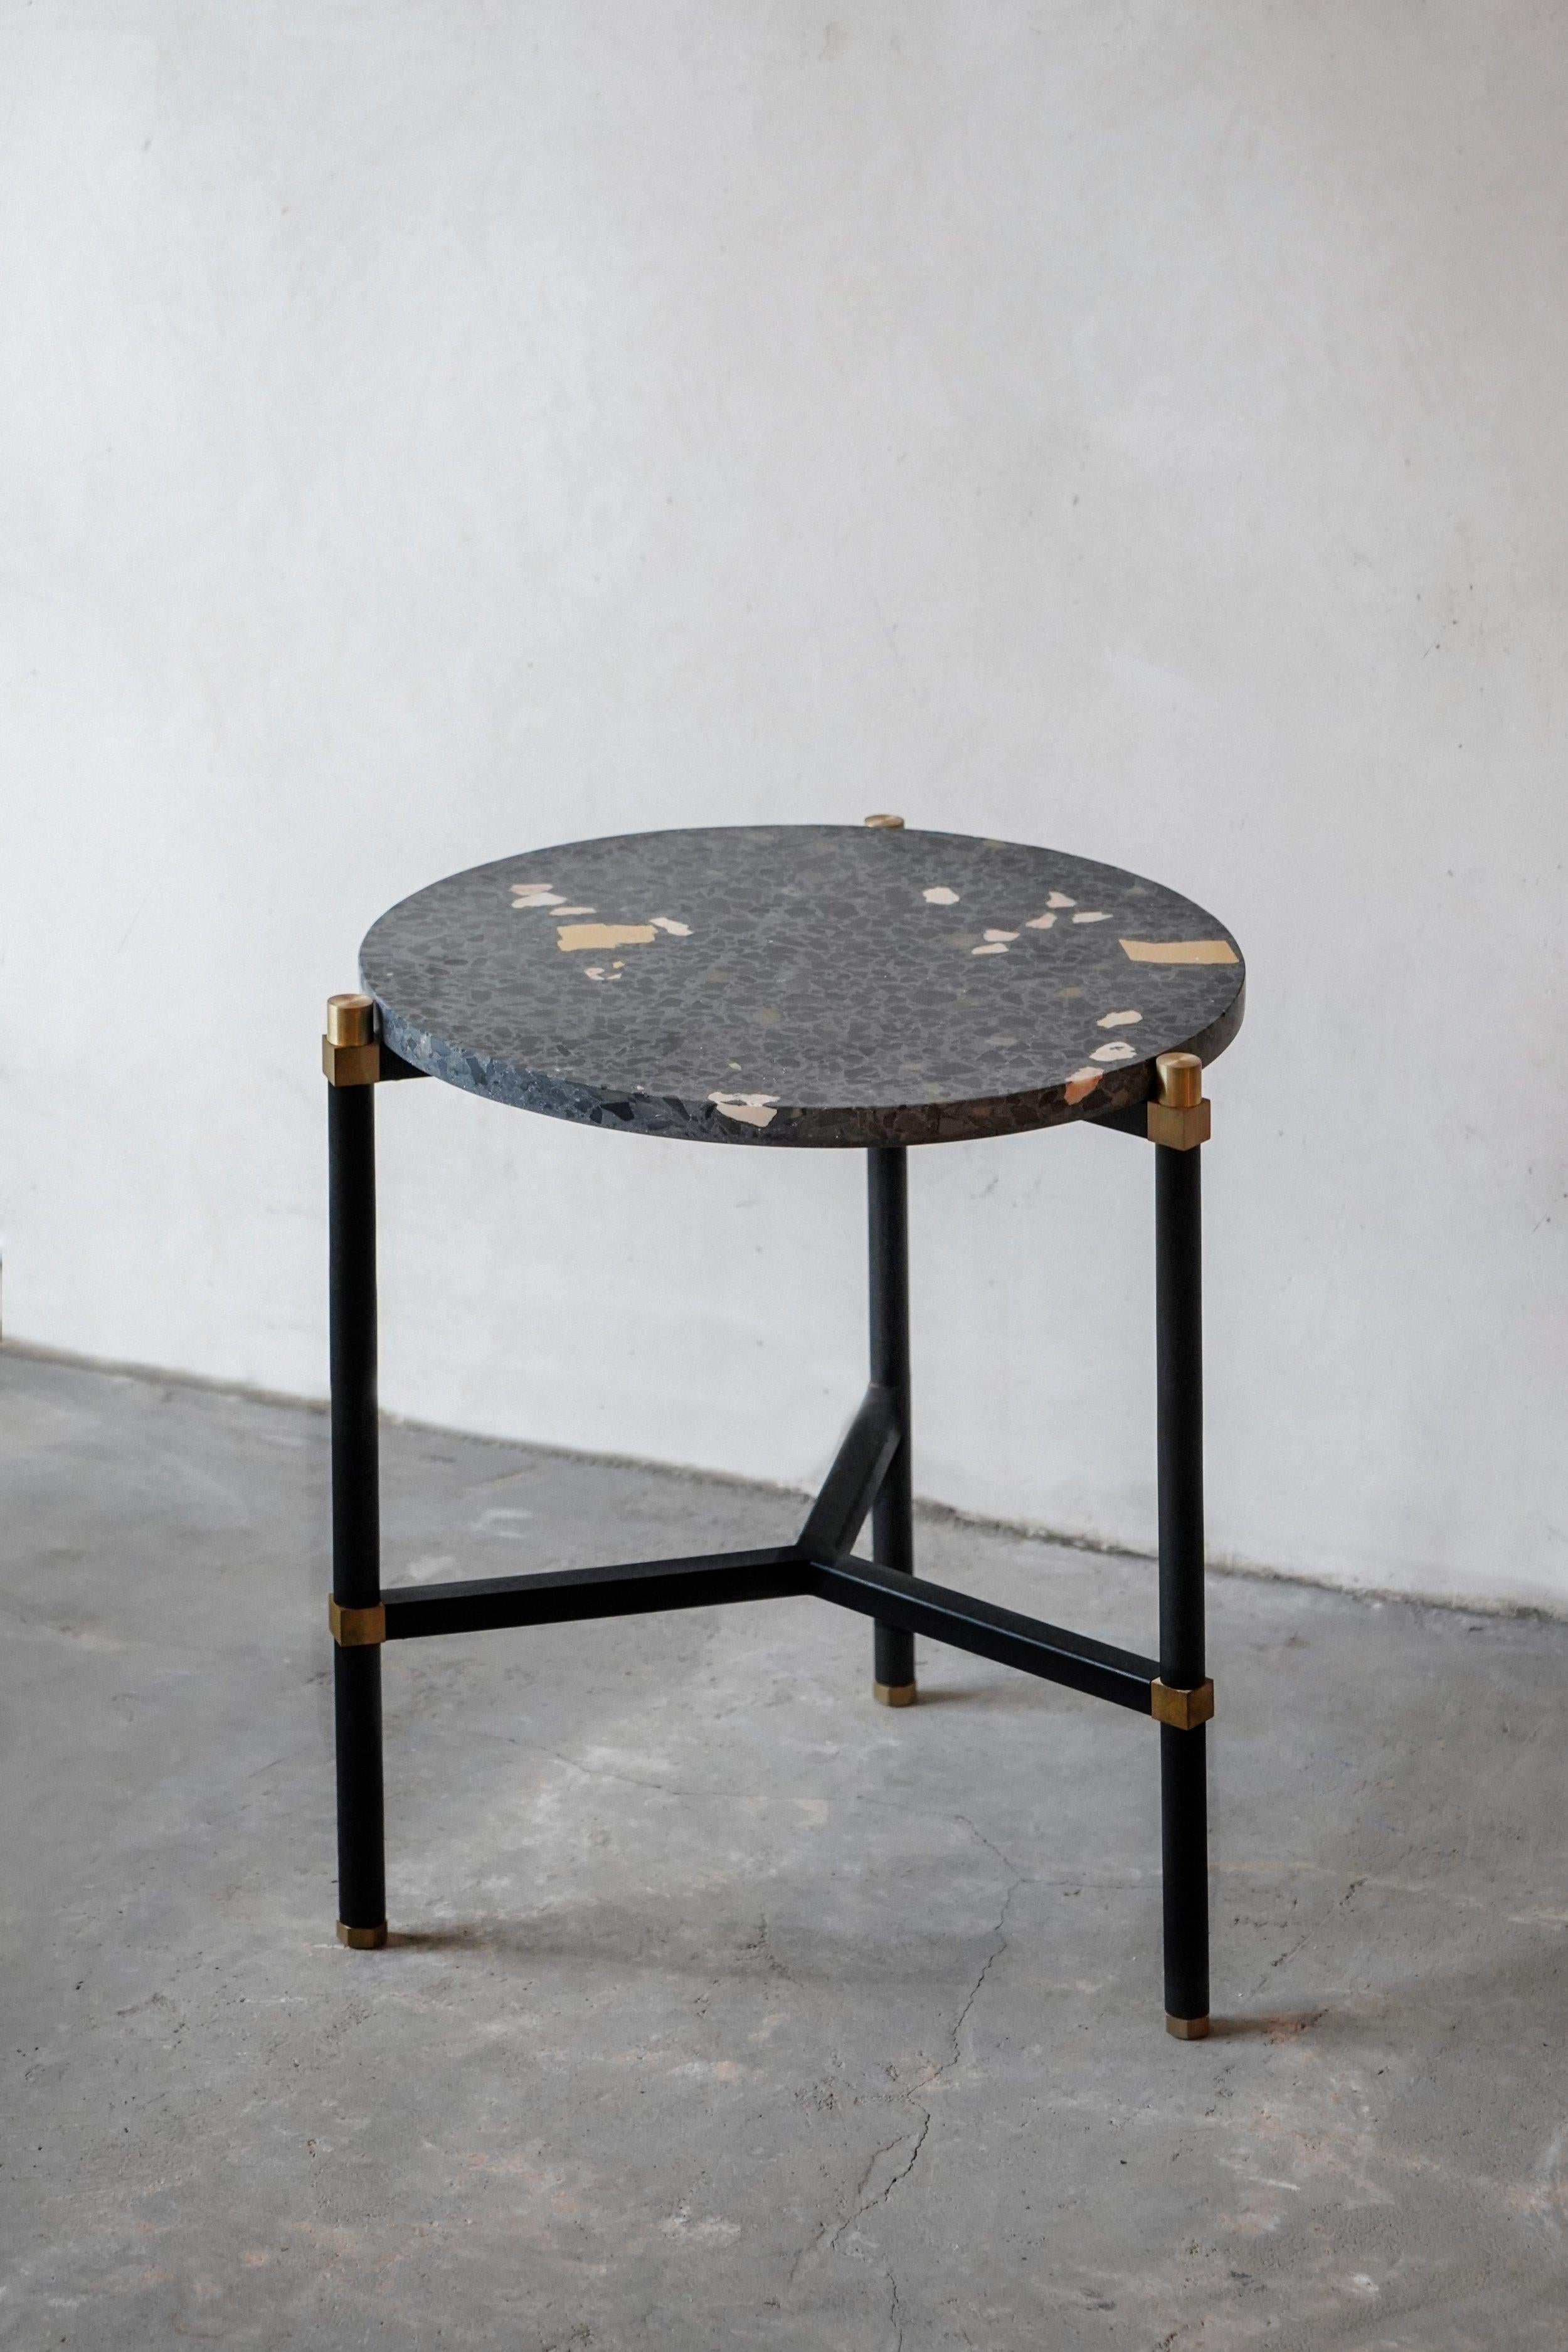 Simple side table 40 3 legs by Contain
Dimensions: D 40 x H 51 cm 
Materials:iron, brass, terrazzo, marble, stone.
Available in different finishes and dimensions. 

The Connector furniture collection is based on single assembly pieces that get